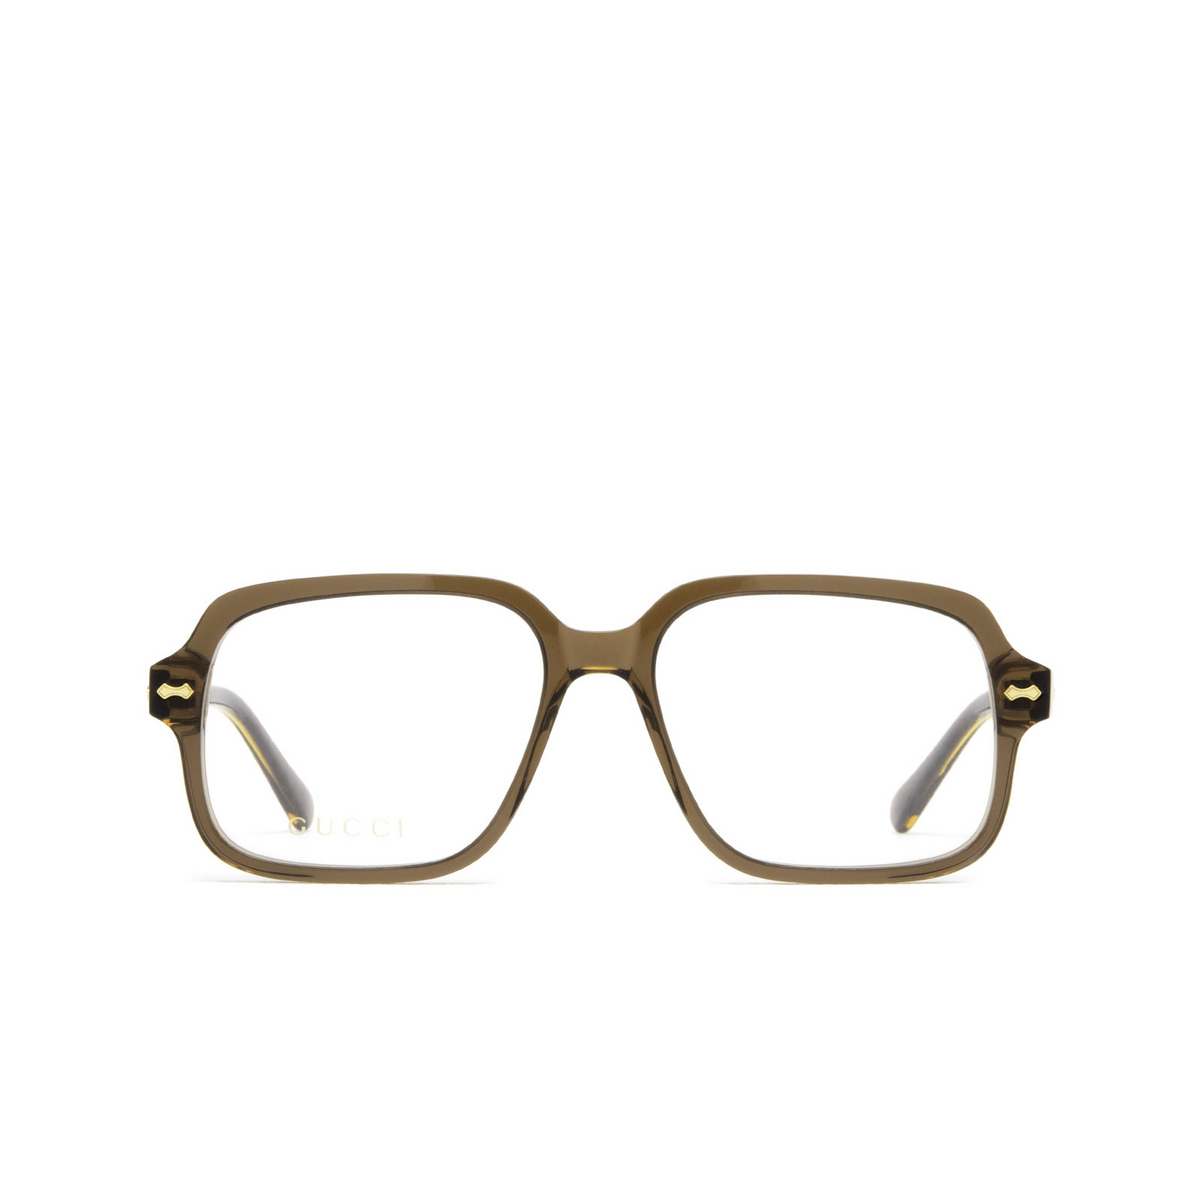 Gucci® Rectangle Eyeglasses: GG0913O color Brown 003 - front view.